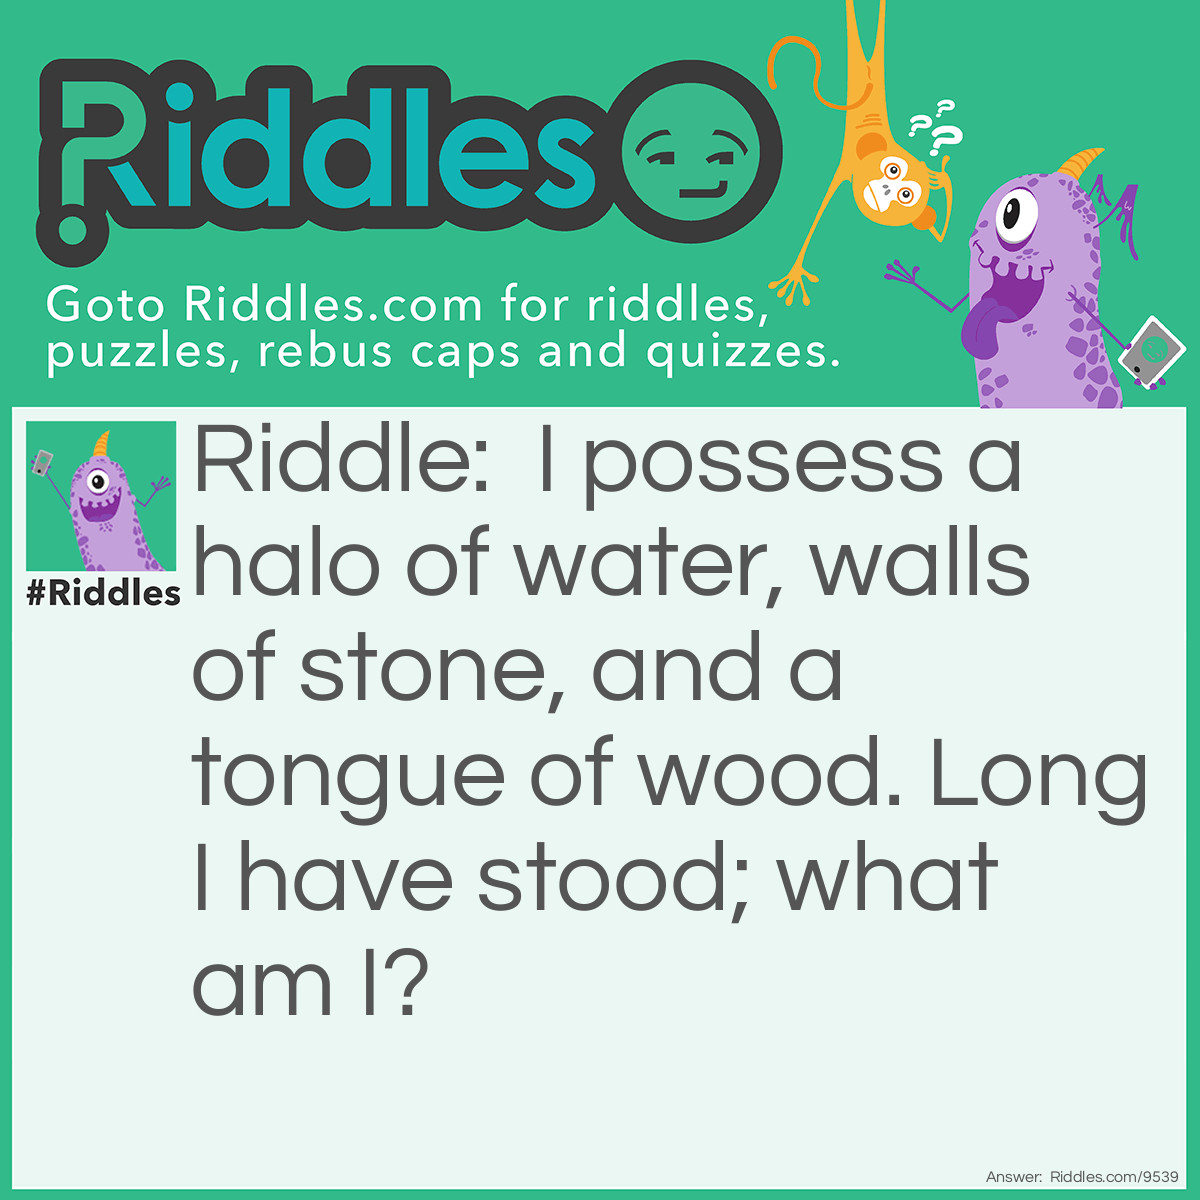 Riddle: I possess a halo of water, walls of stone, and a tongue of wood. Long I have stood; what am I? Answer: A castle.